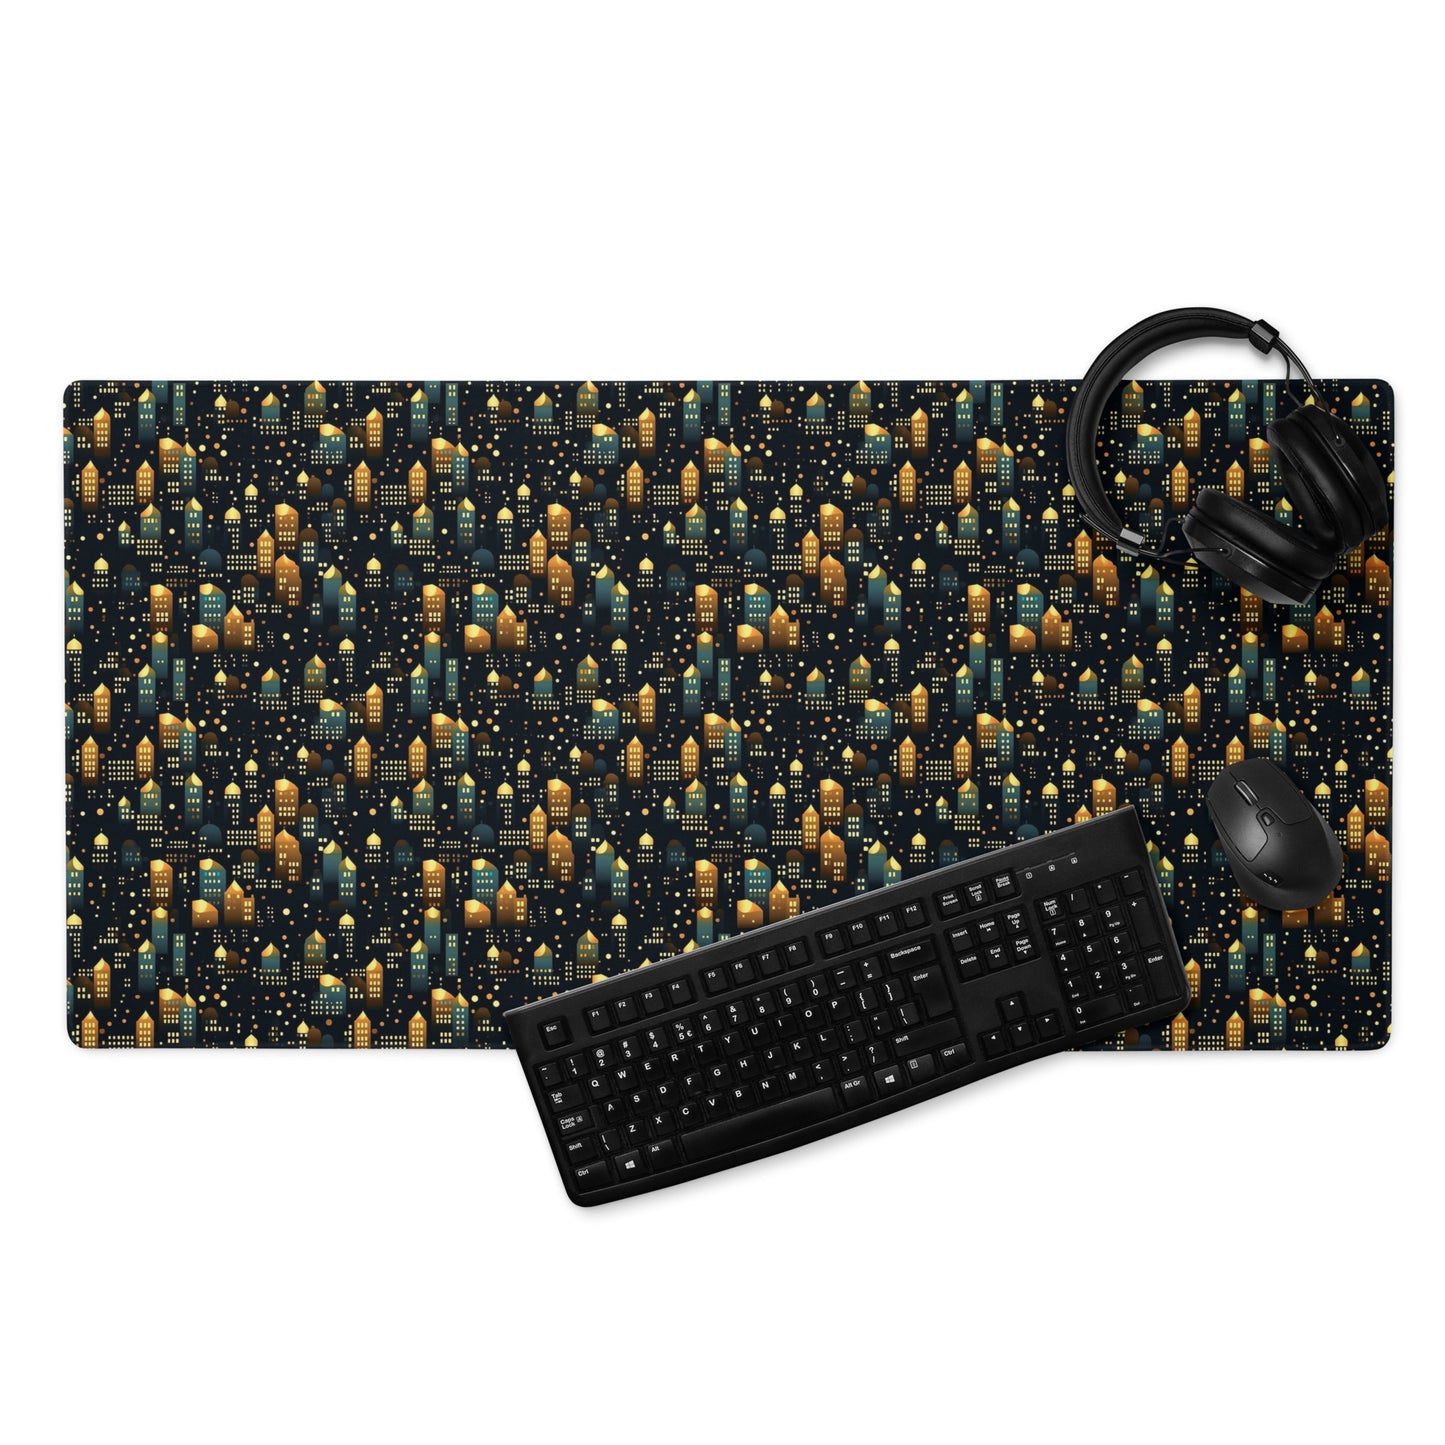 A 36" x 18" desk pad with a stary city pattern. With a keyboard, mouse, and headphones sitting on it.